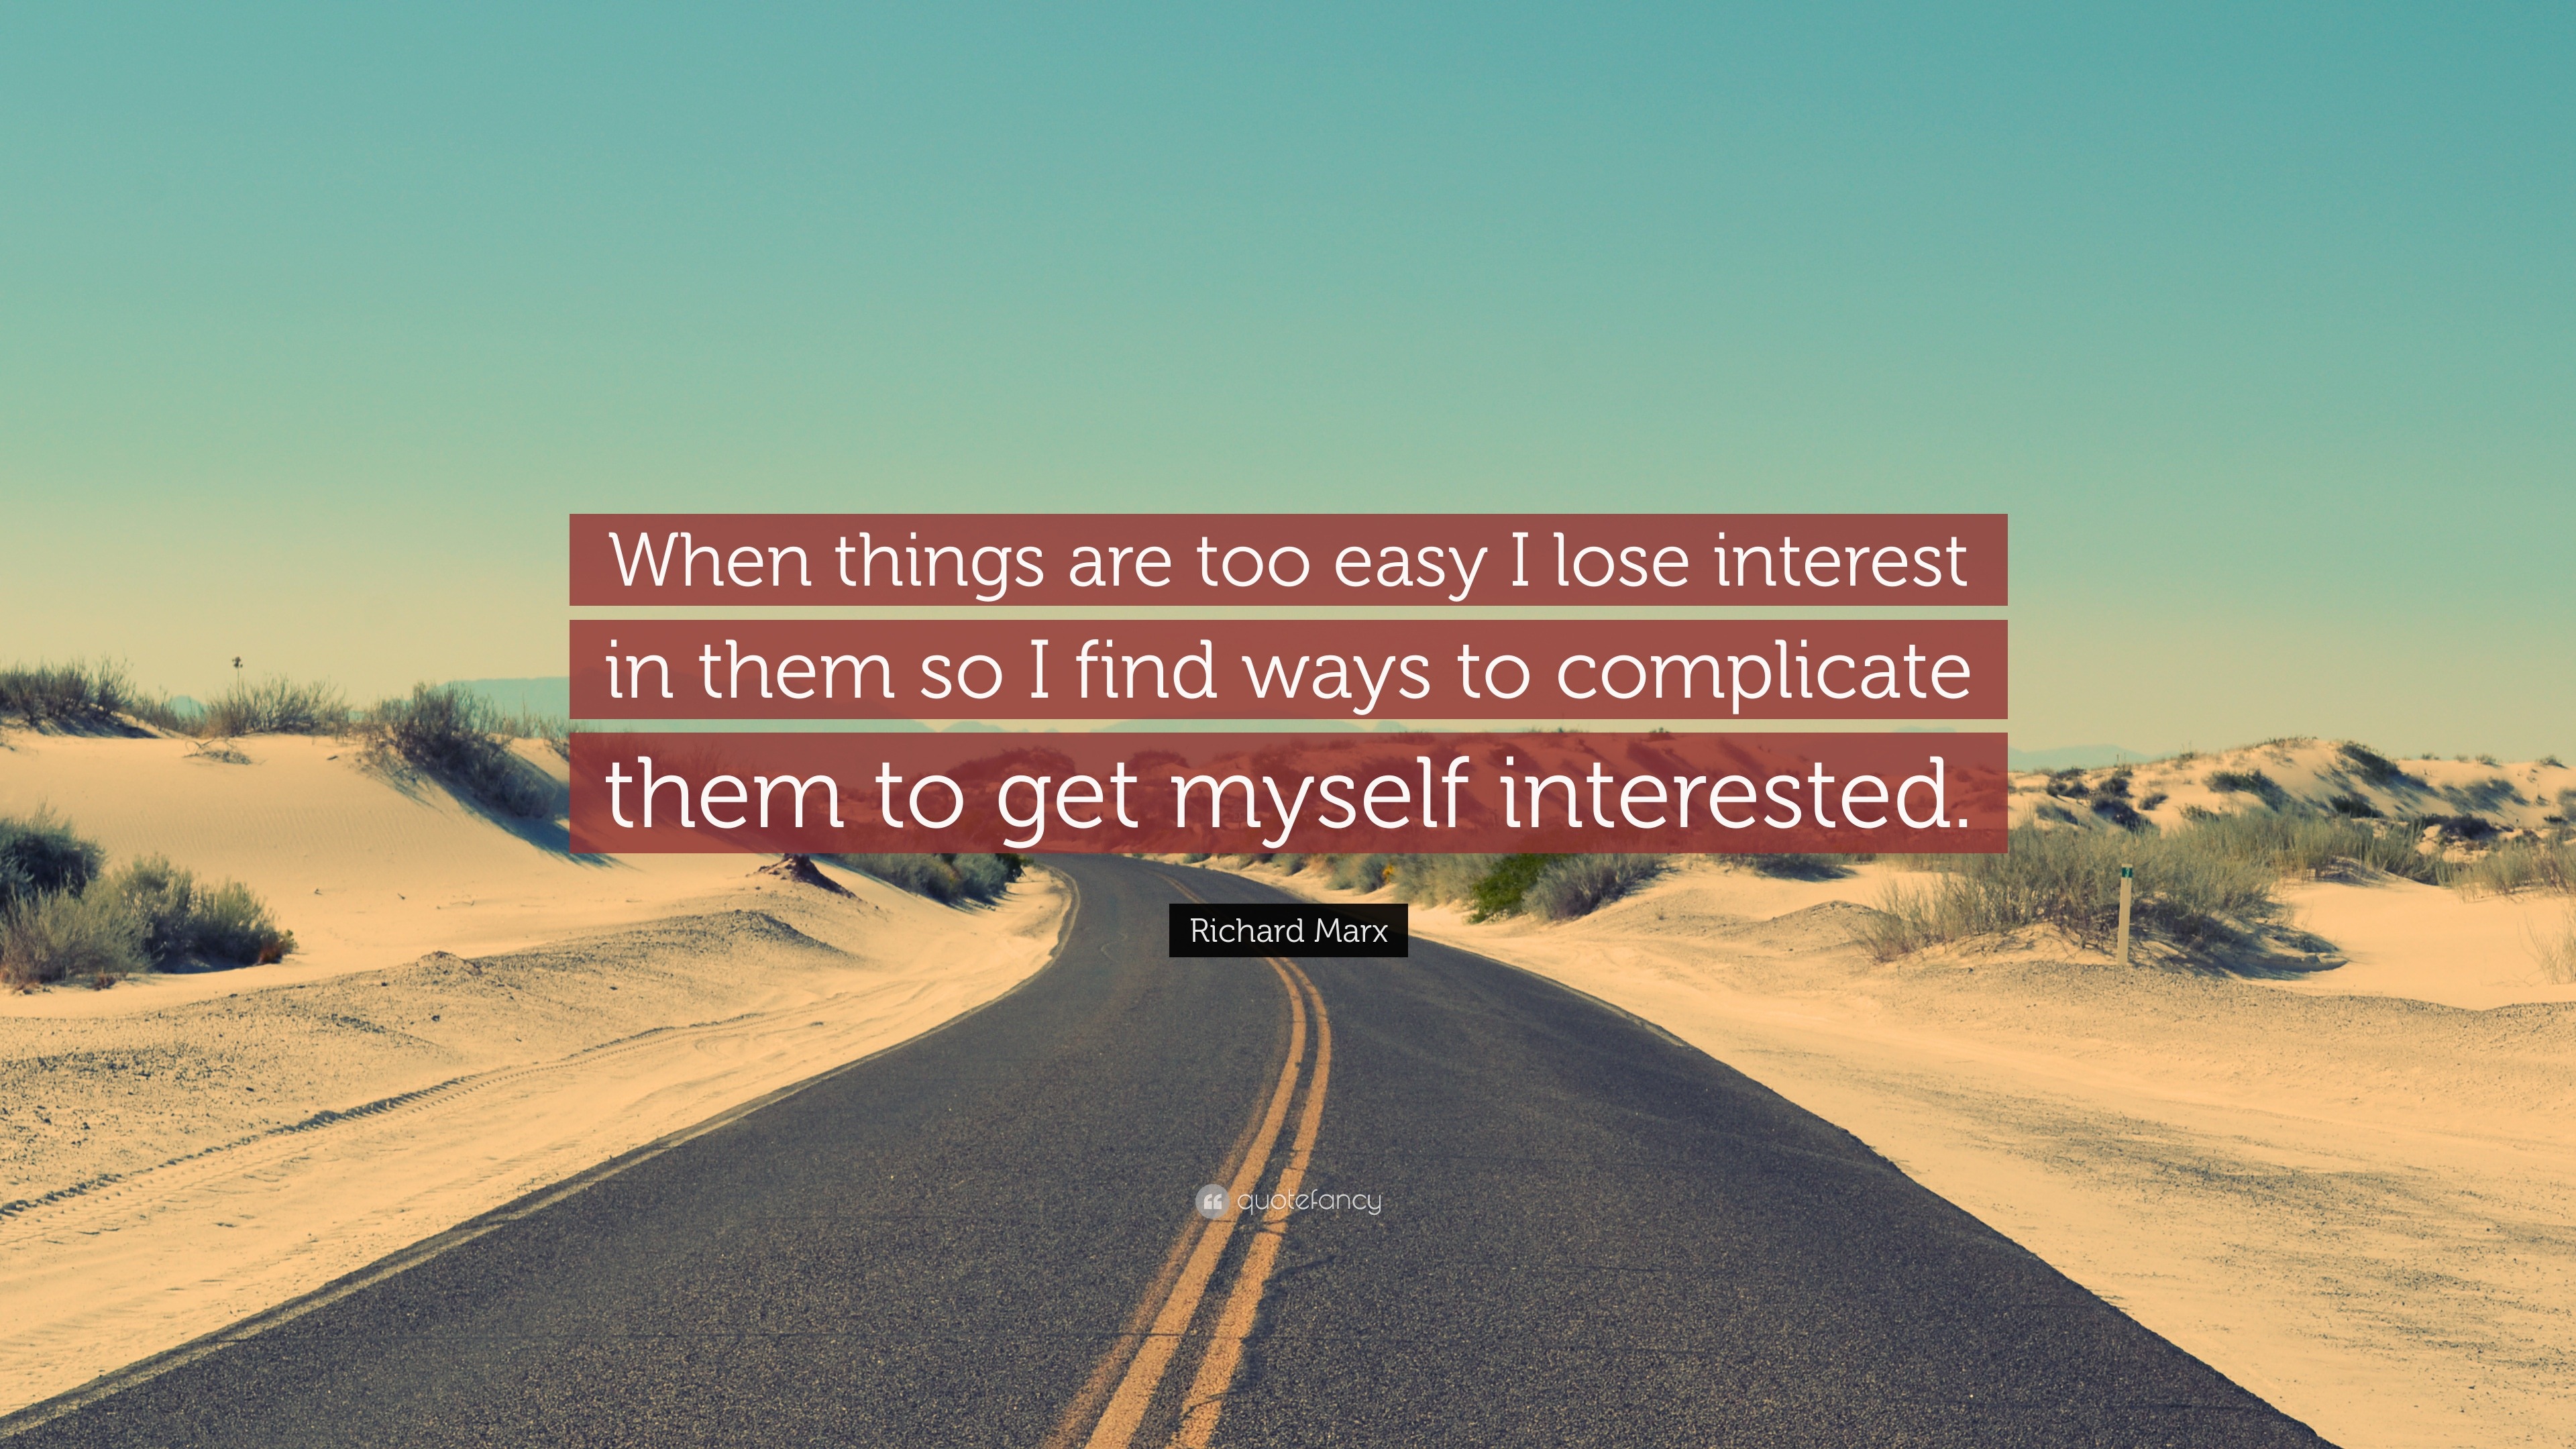 Richard Marx Quote: “When things are too easy I lose interest in them so I  find